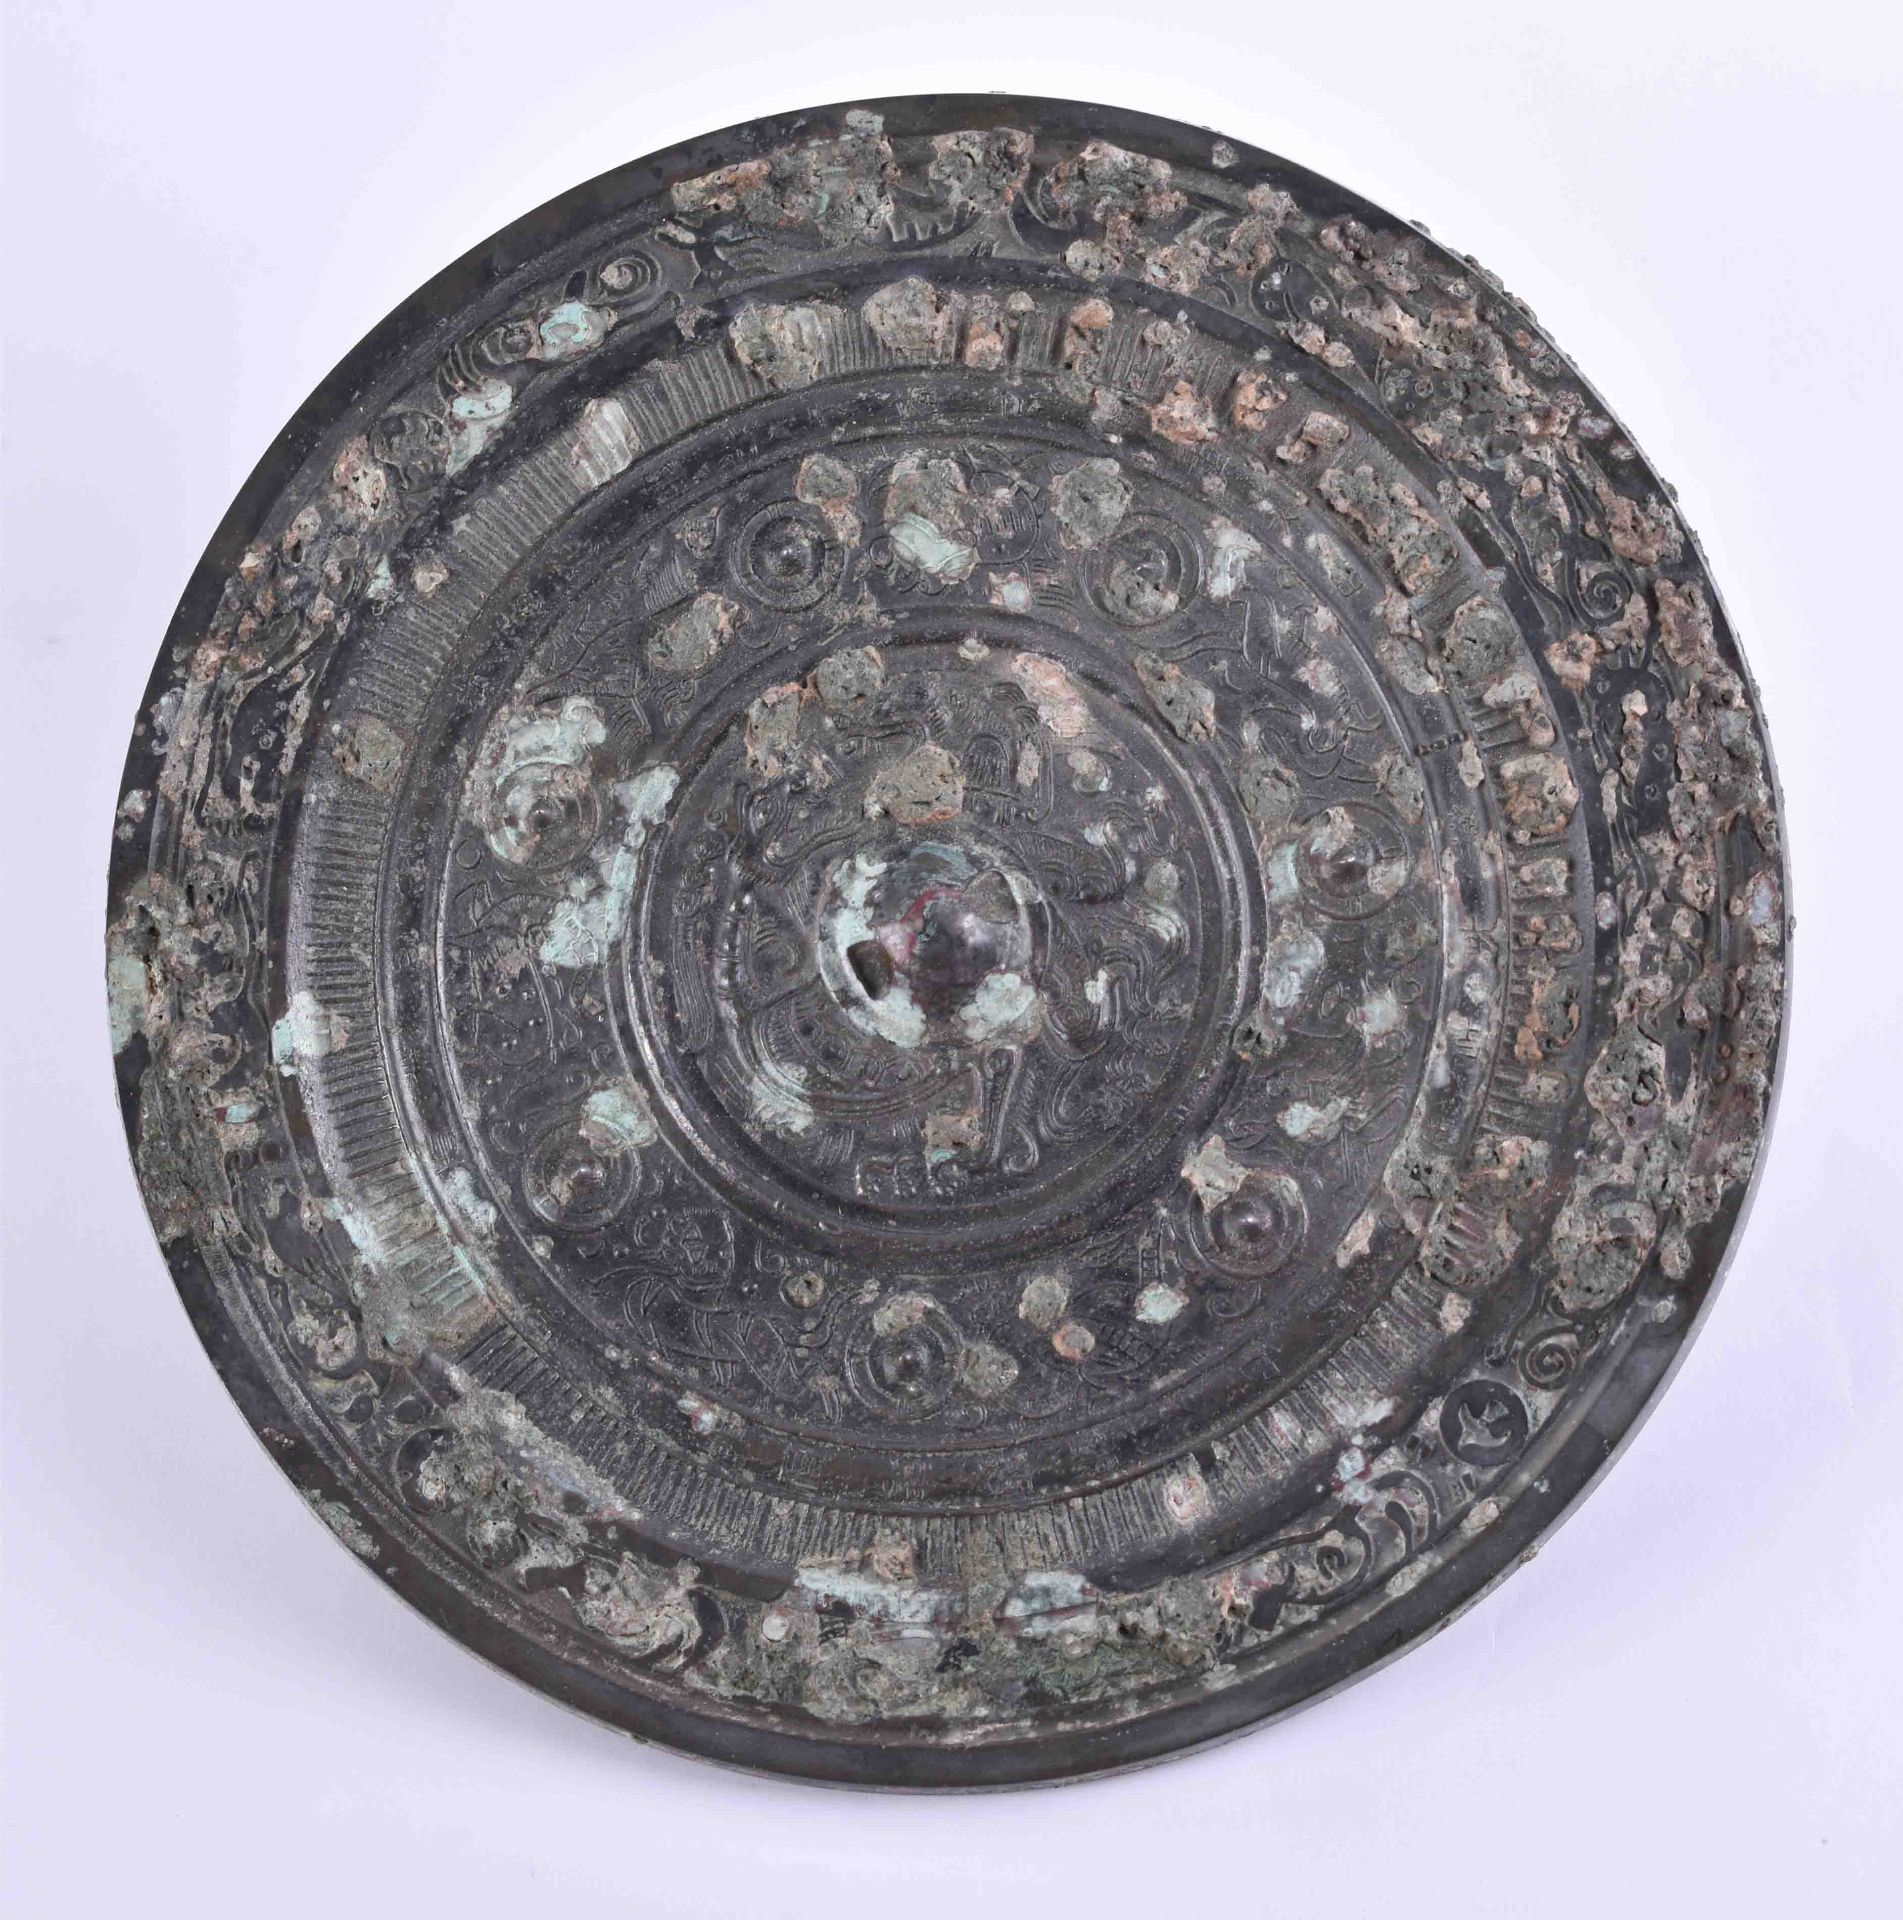 Bronze mirror China probably Tang dynastyon the front side with relief decor, Ø 20.5 cm, weight